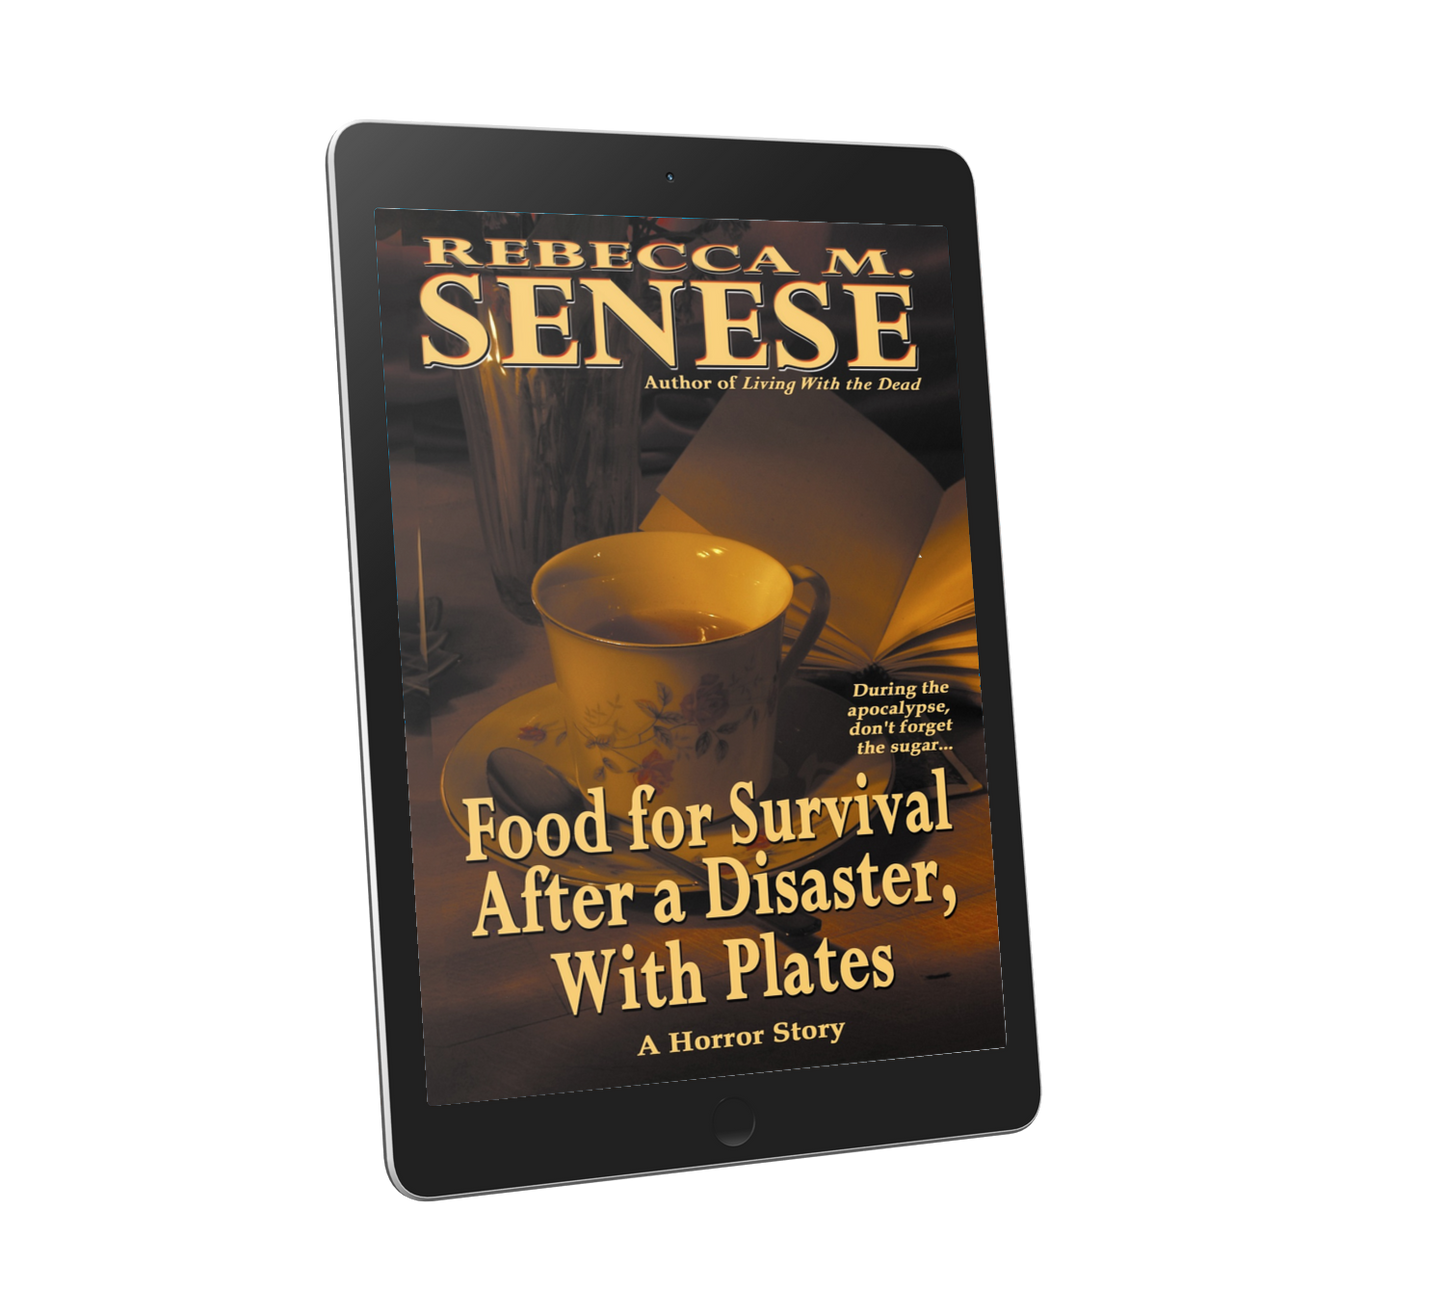 Food for Survival After a Disaster, With Plates